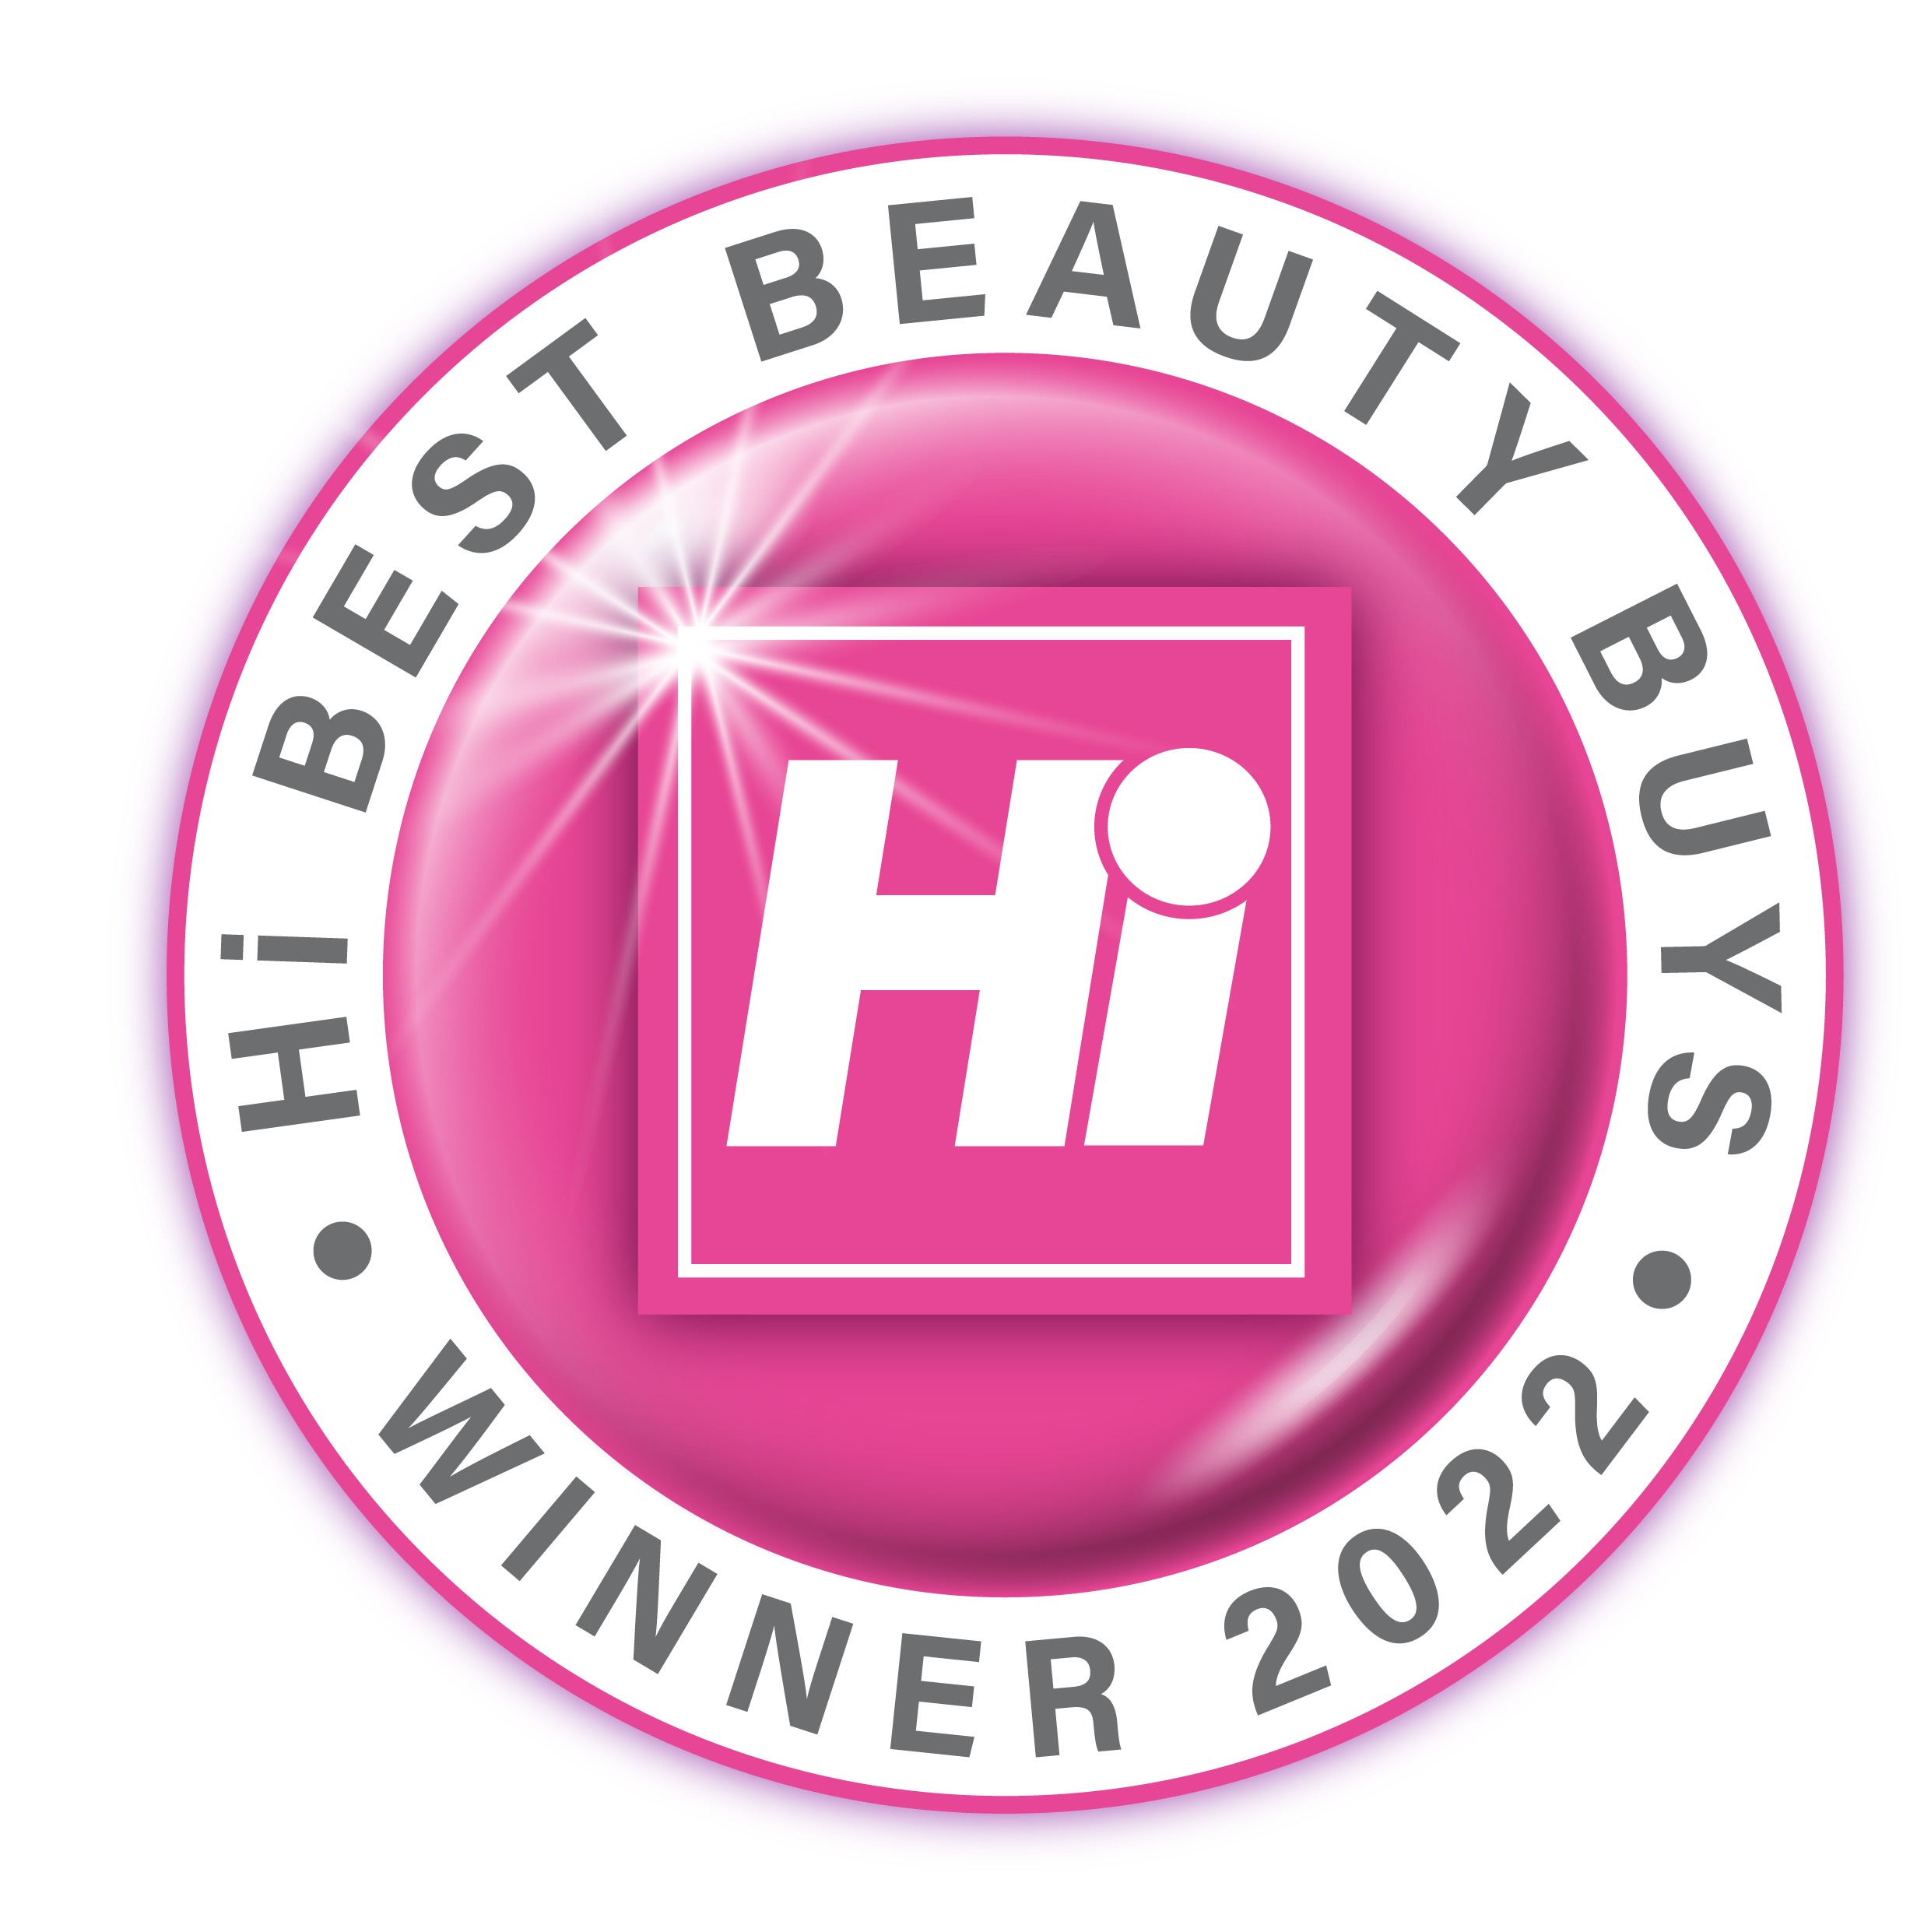 The image shows an award from hi. This is a pink circle with hi in the middle and Best beauty buys winner 2022 around the outside.